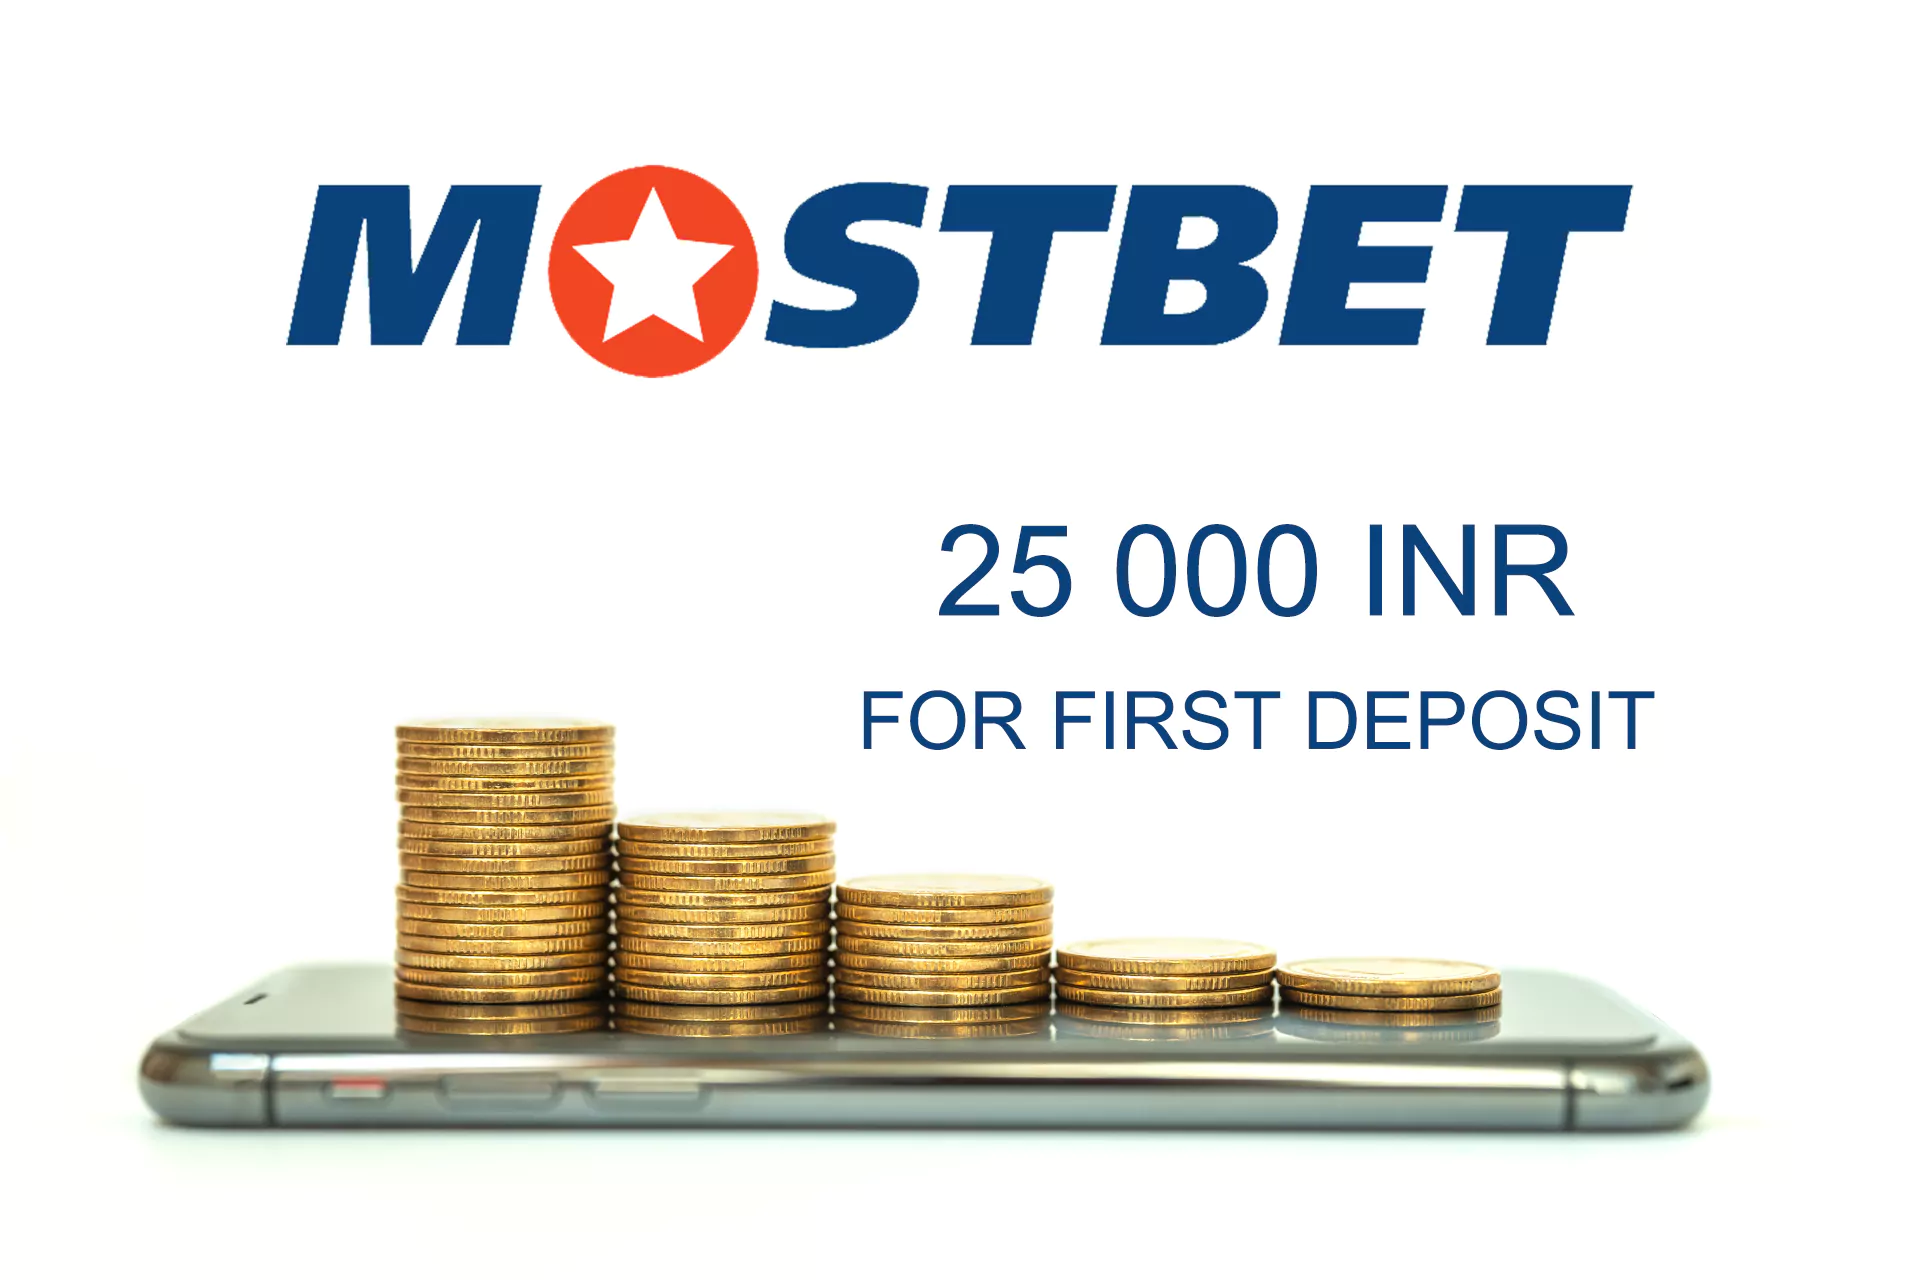 After making the first deposit you can get a bonus of up to 25000 INR.